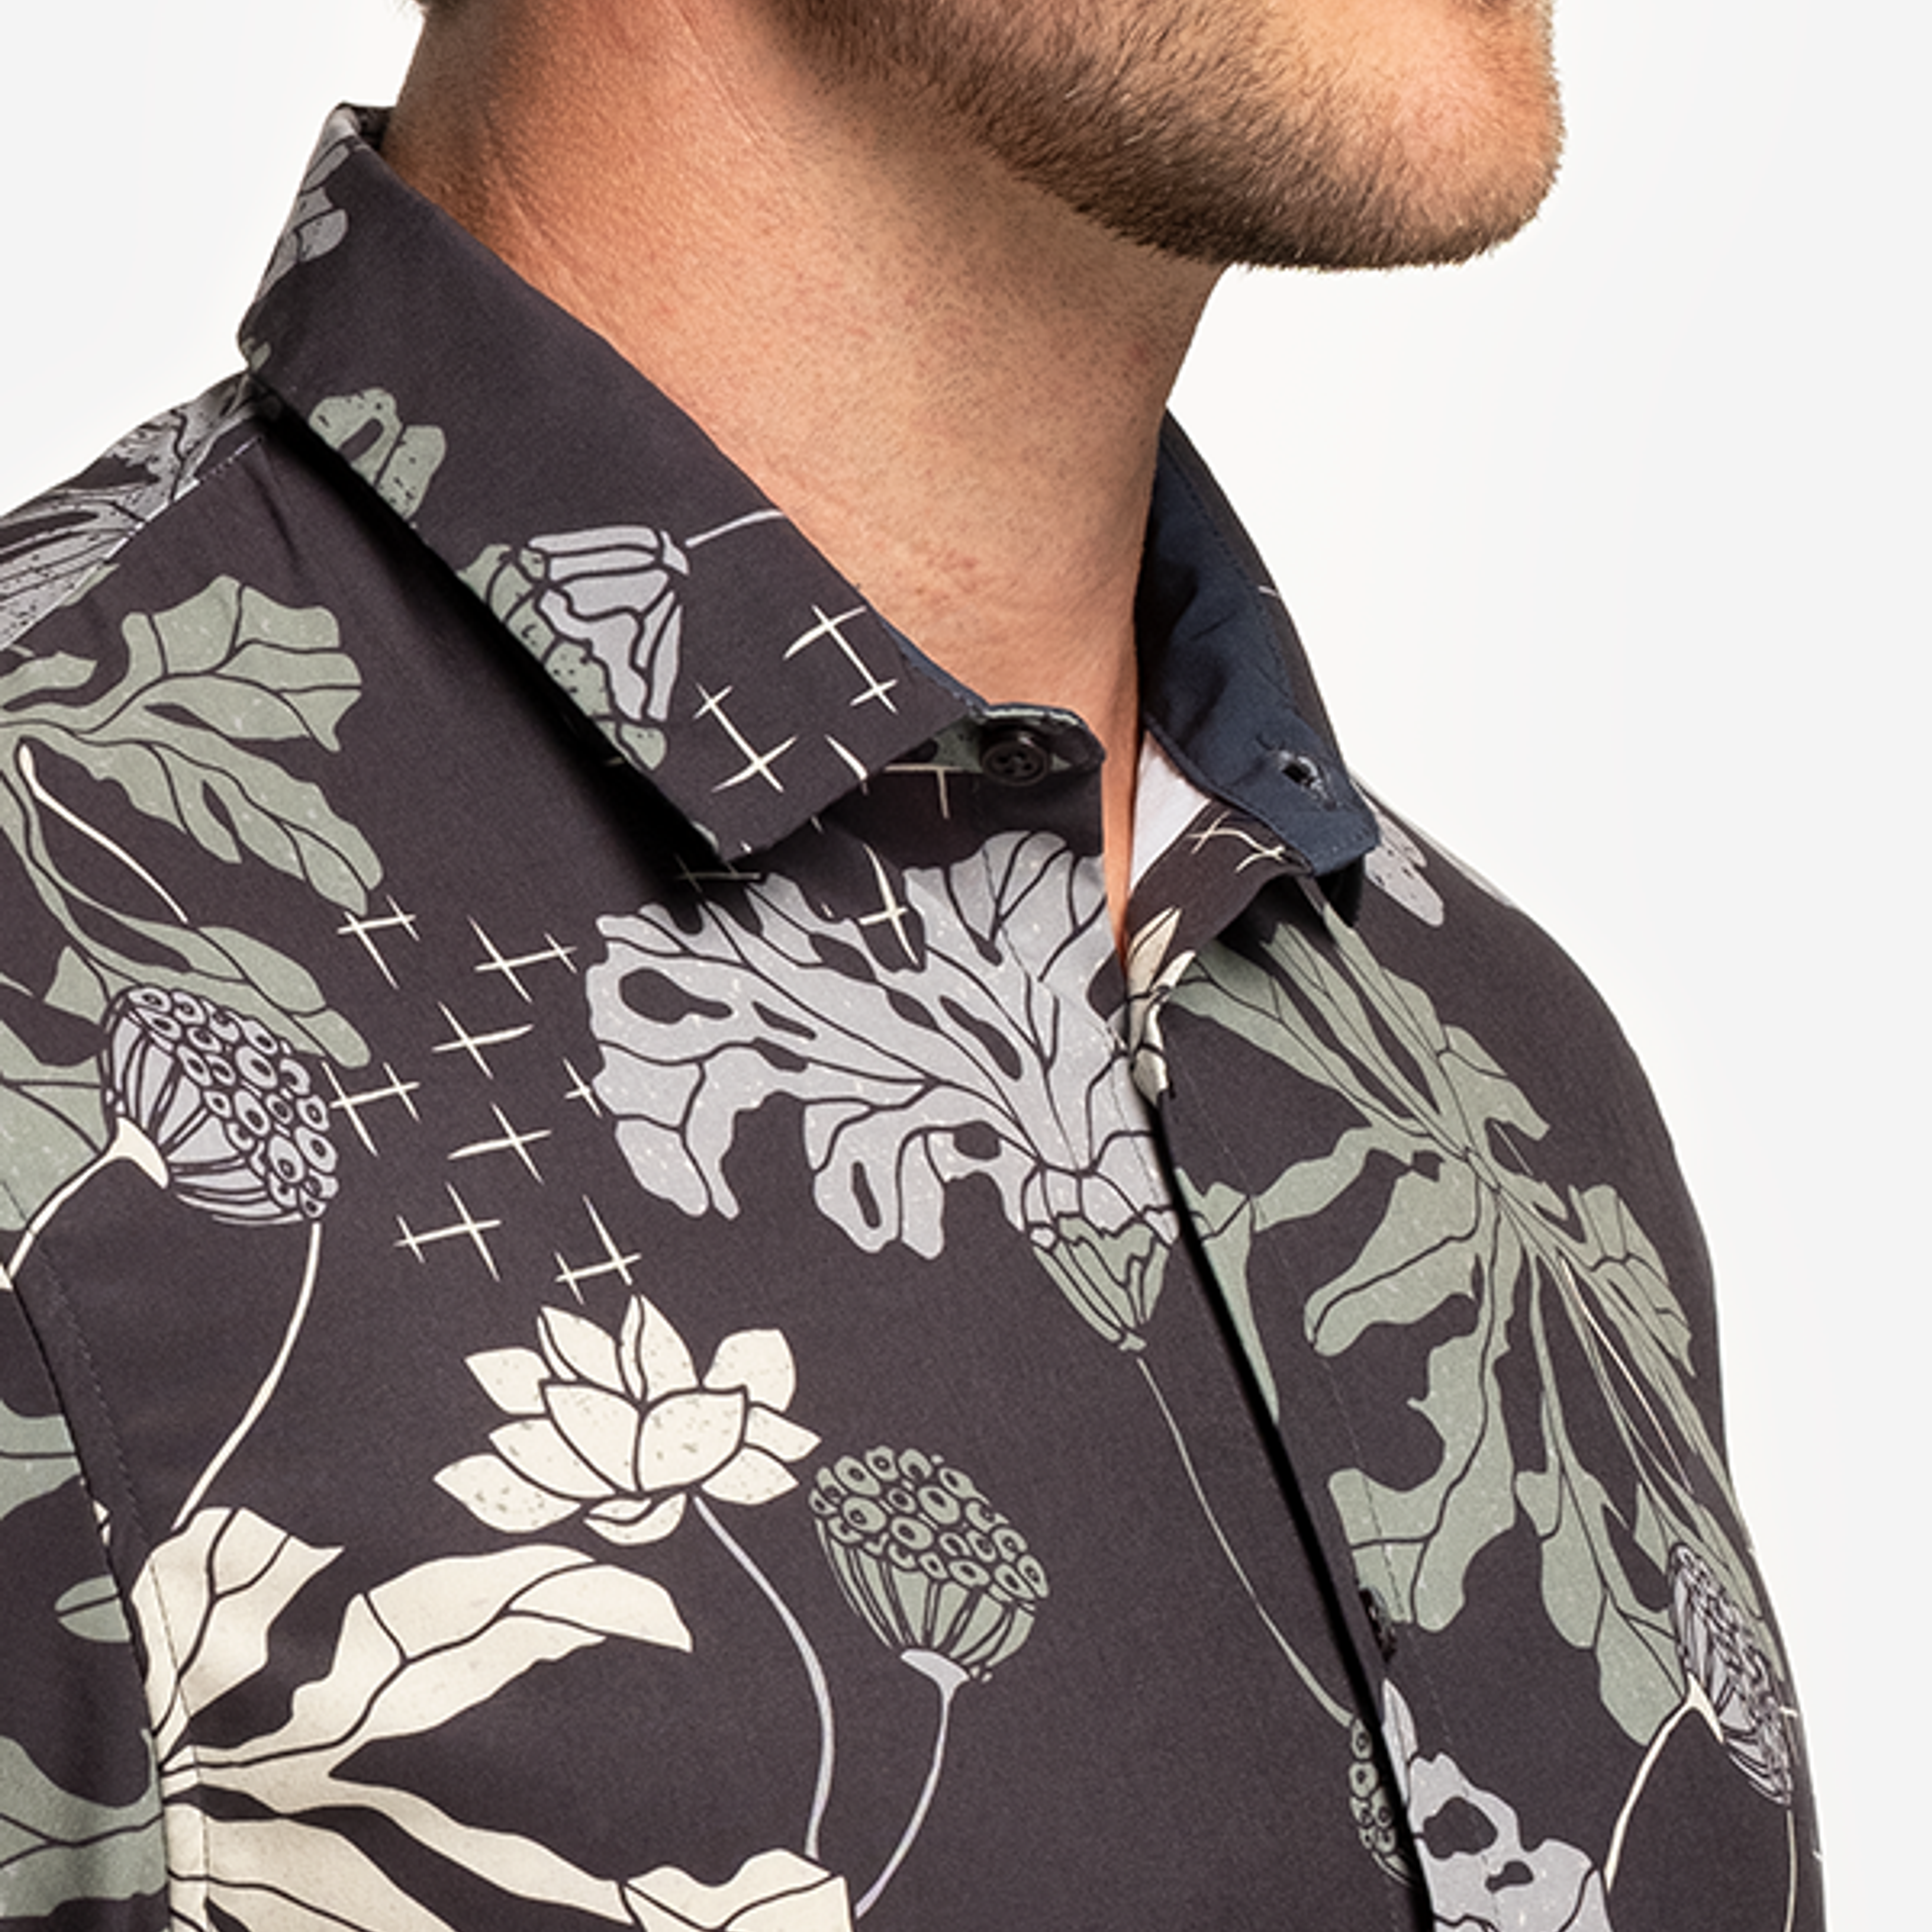 Oasis Short Sleeve Button Down